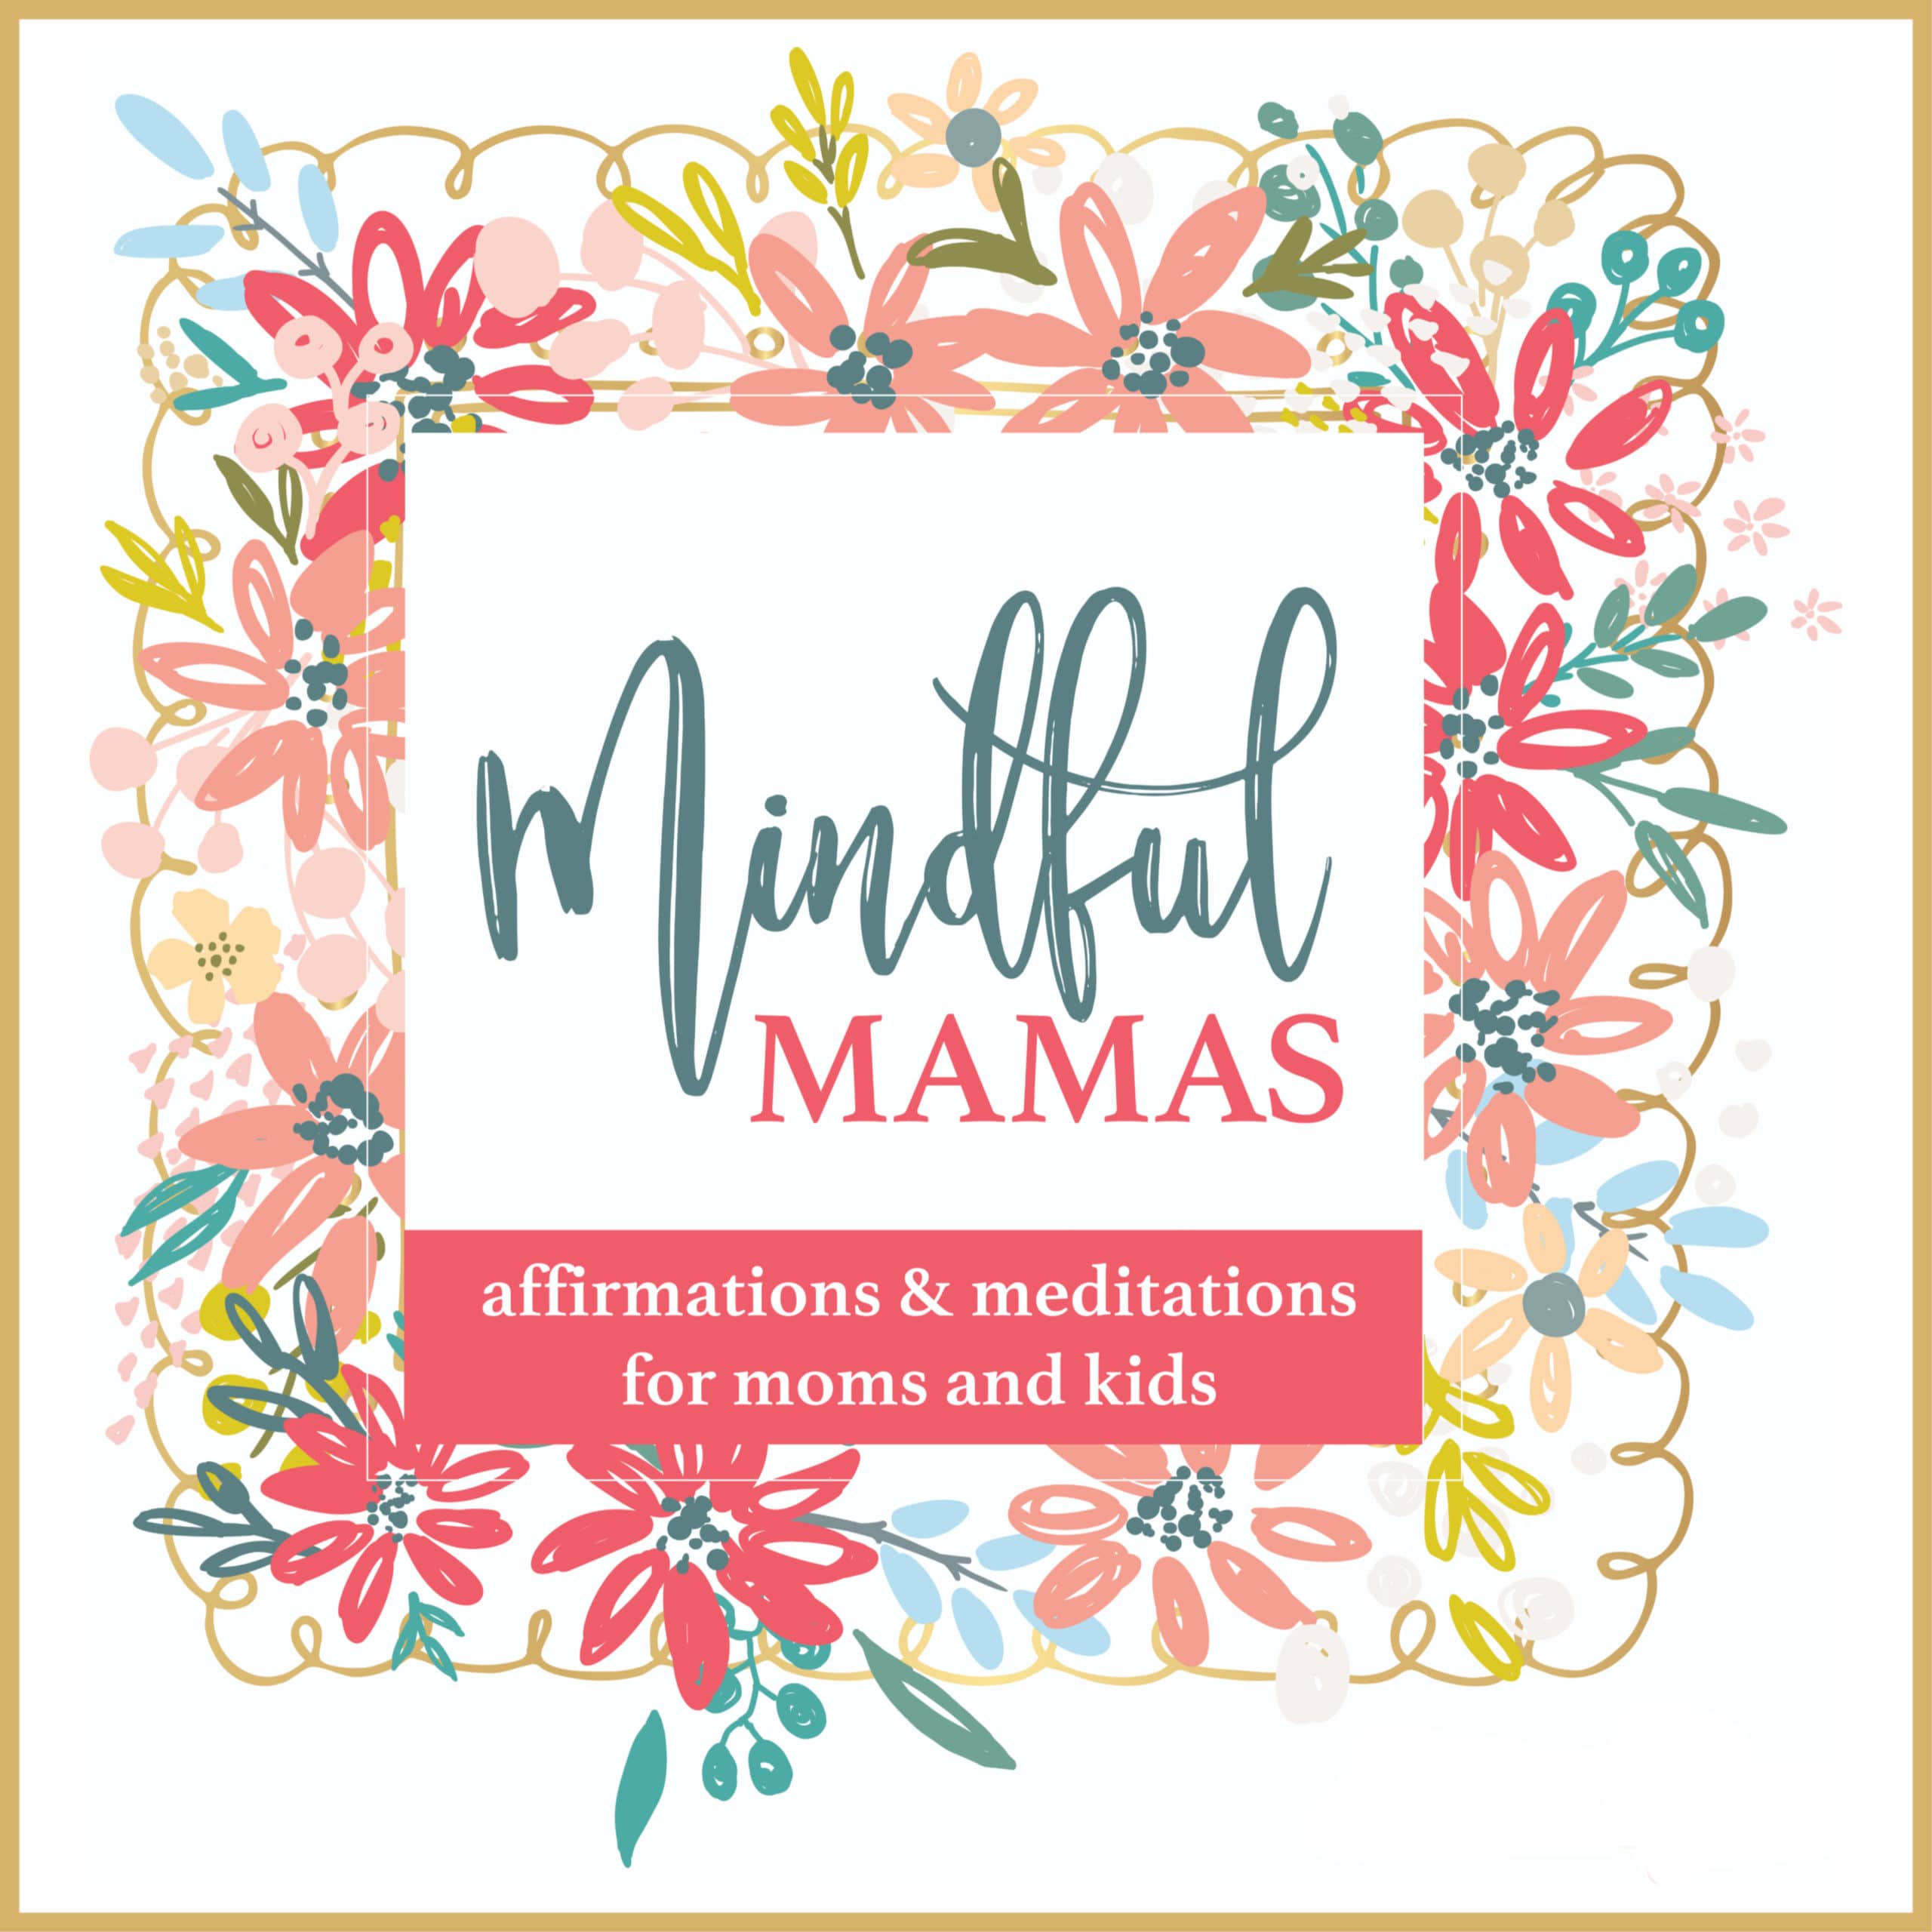 Mindful Mamas - Affirmations and Meditations Album for Moms and Kids